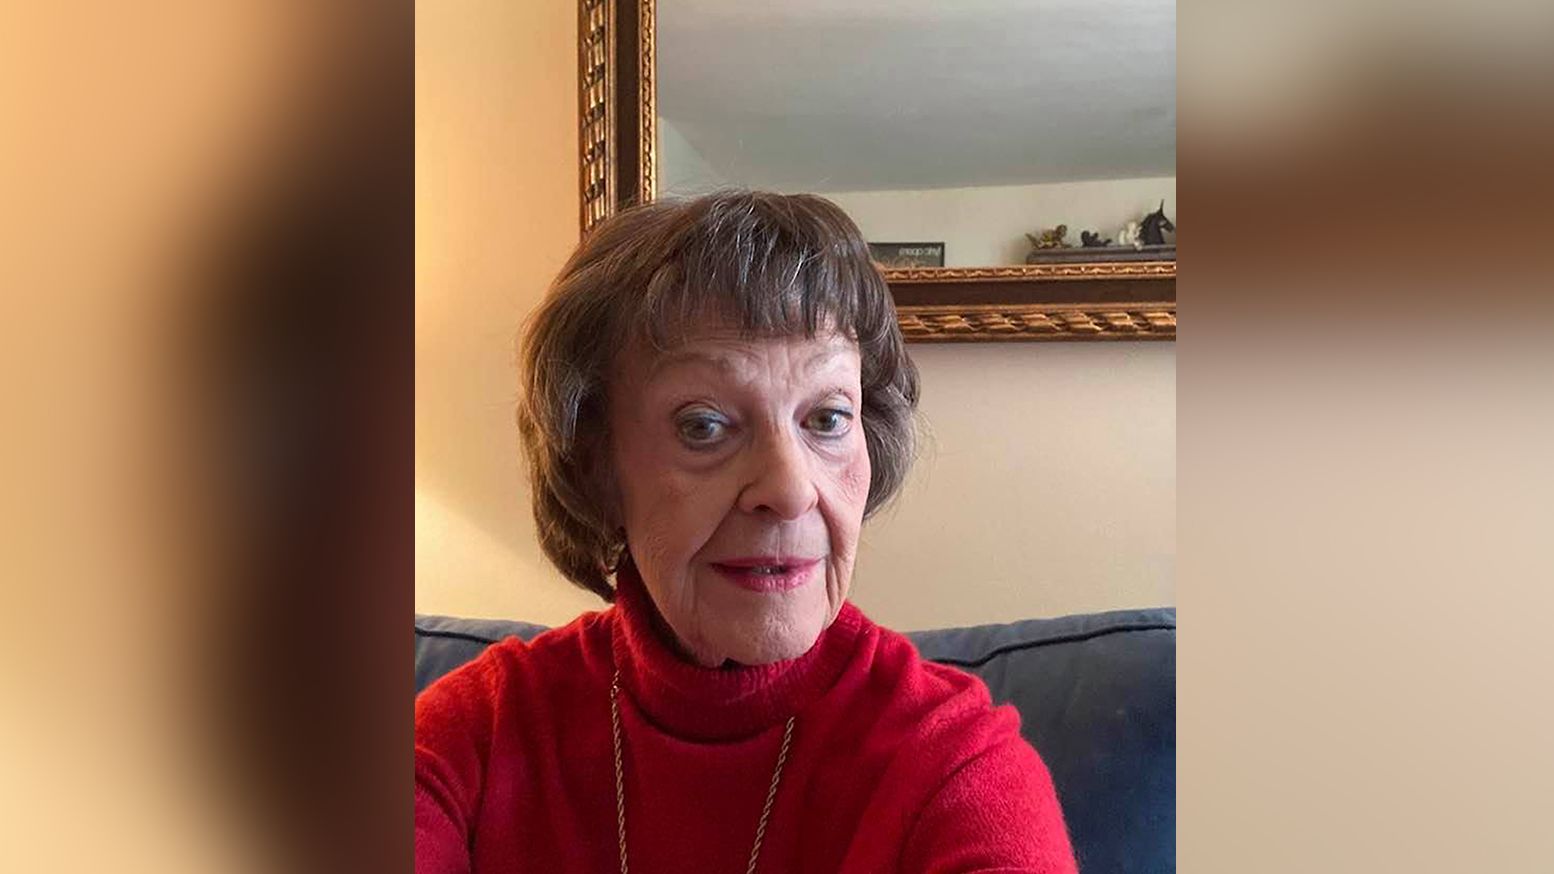 Barbara Maier Gustern, 87, died last week days after she was pushed on the street in New York City.